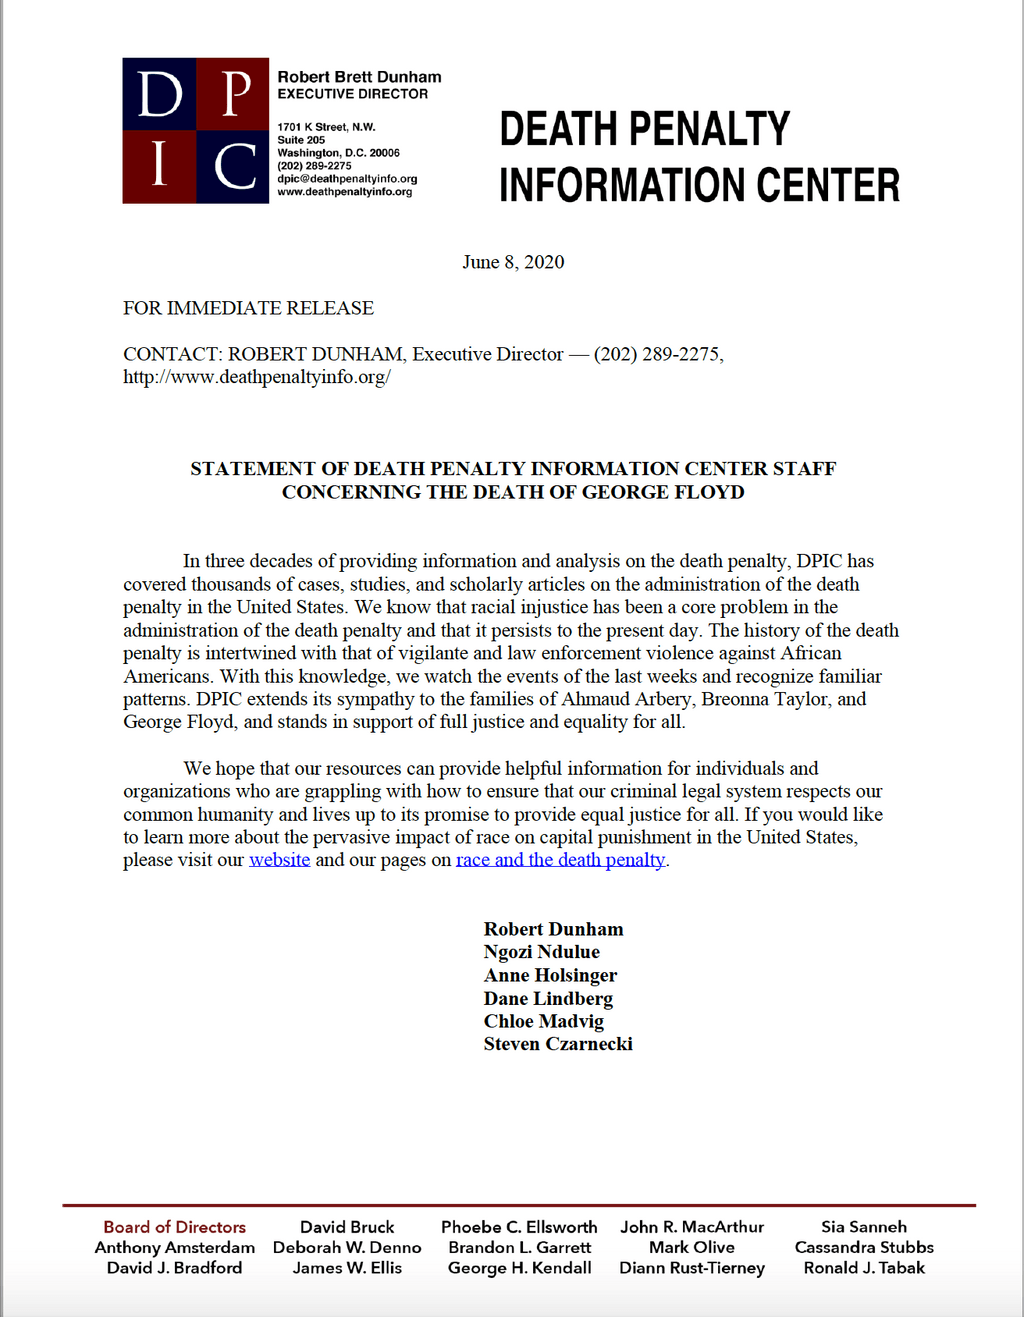 Death Penalty Information Center Statement Concerning the Death of George Floyd